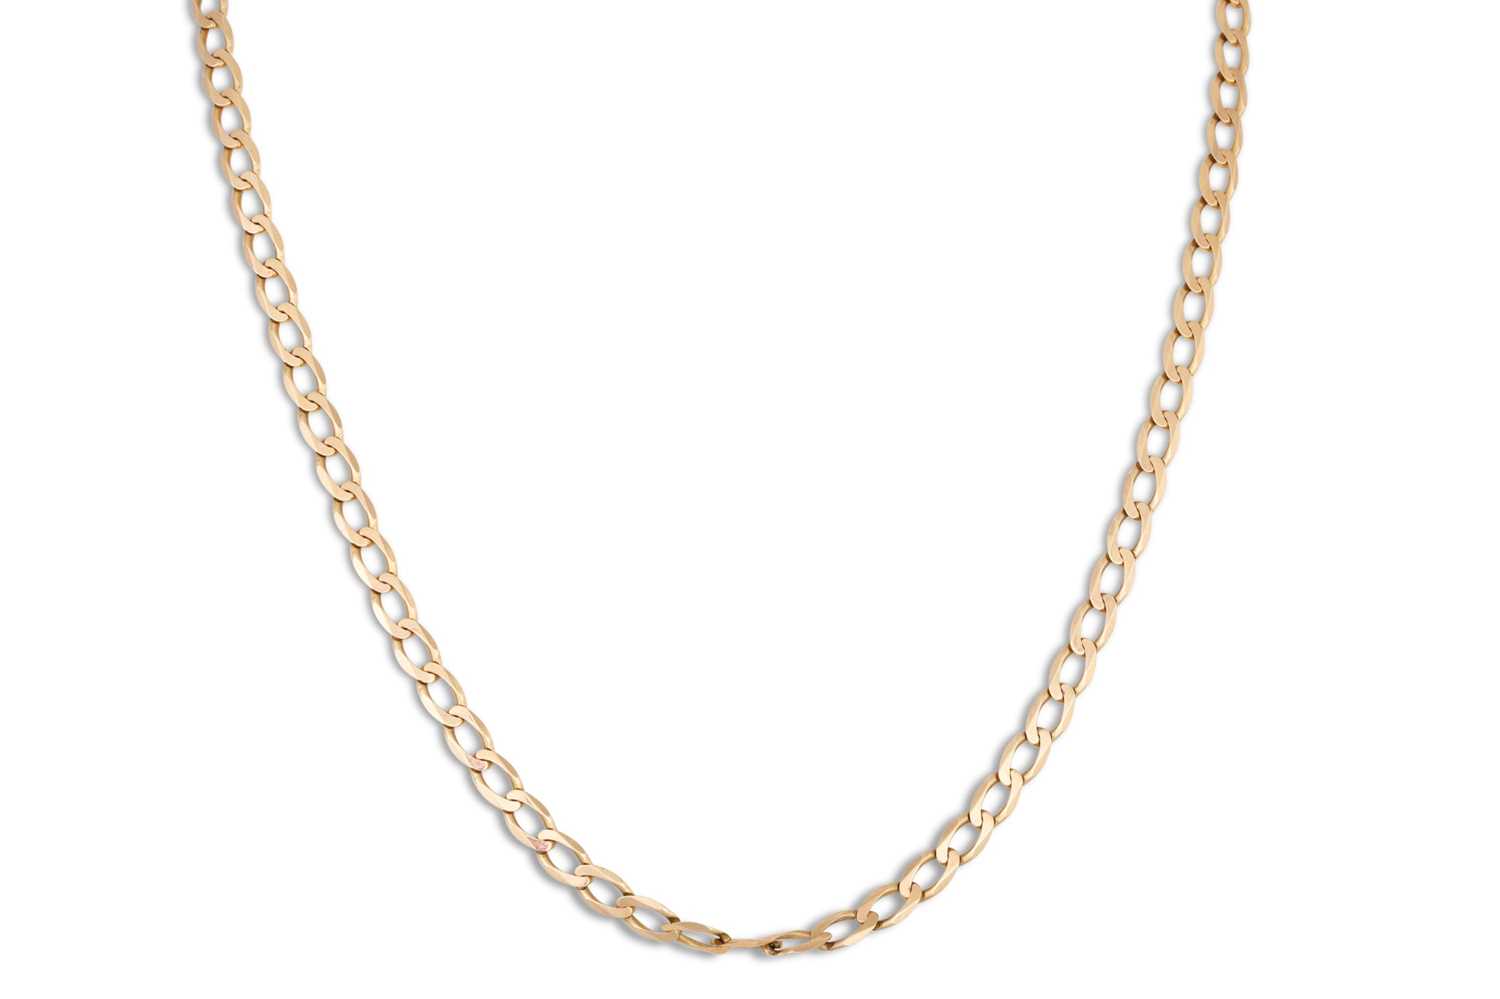 Lot 9 - A 9CT GOLD FLAT LINK NECK CHAIN, ca 21" 10 g.